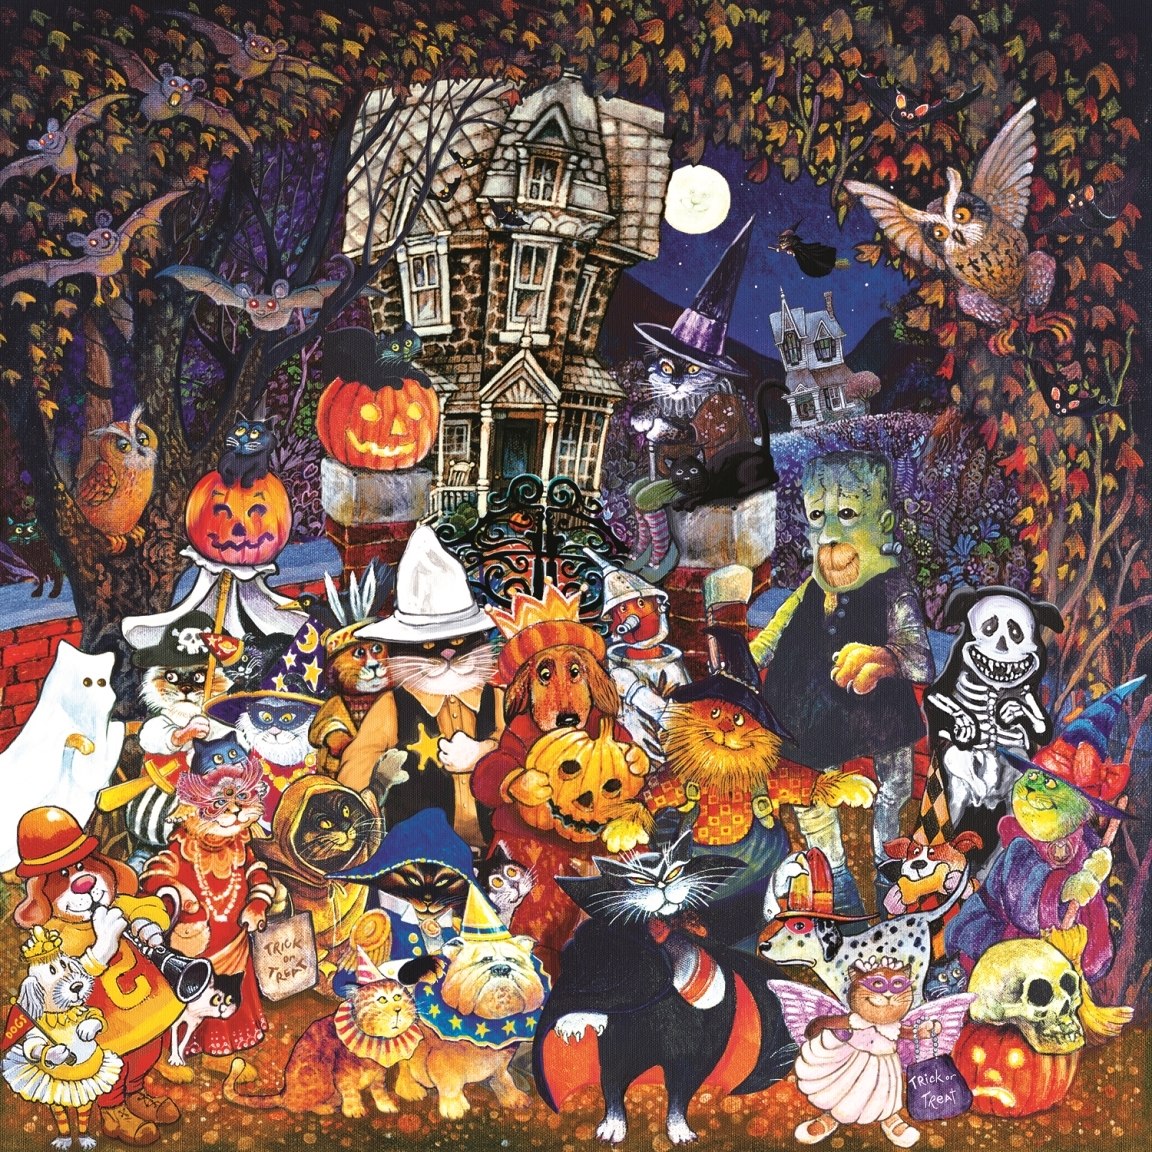 Cats and Dogs on Halloween - 500pc Jigsaw Puzzle By Sunsout  			  					NEW